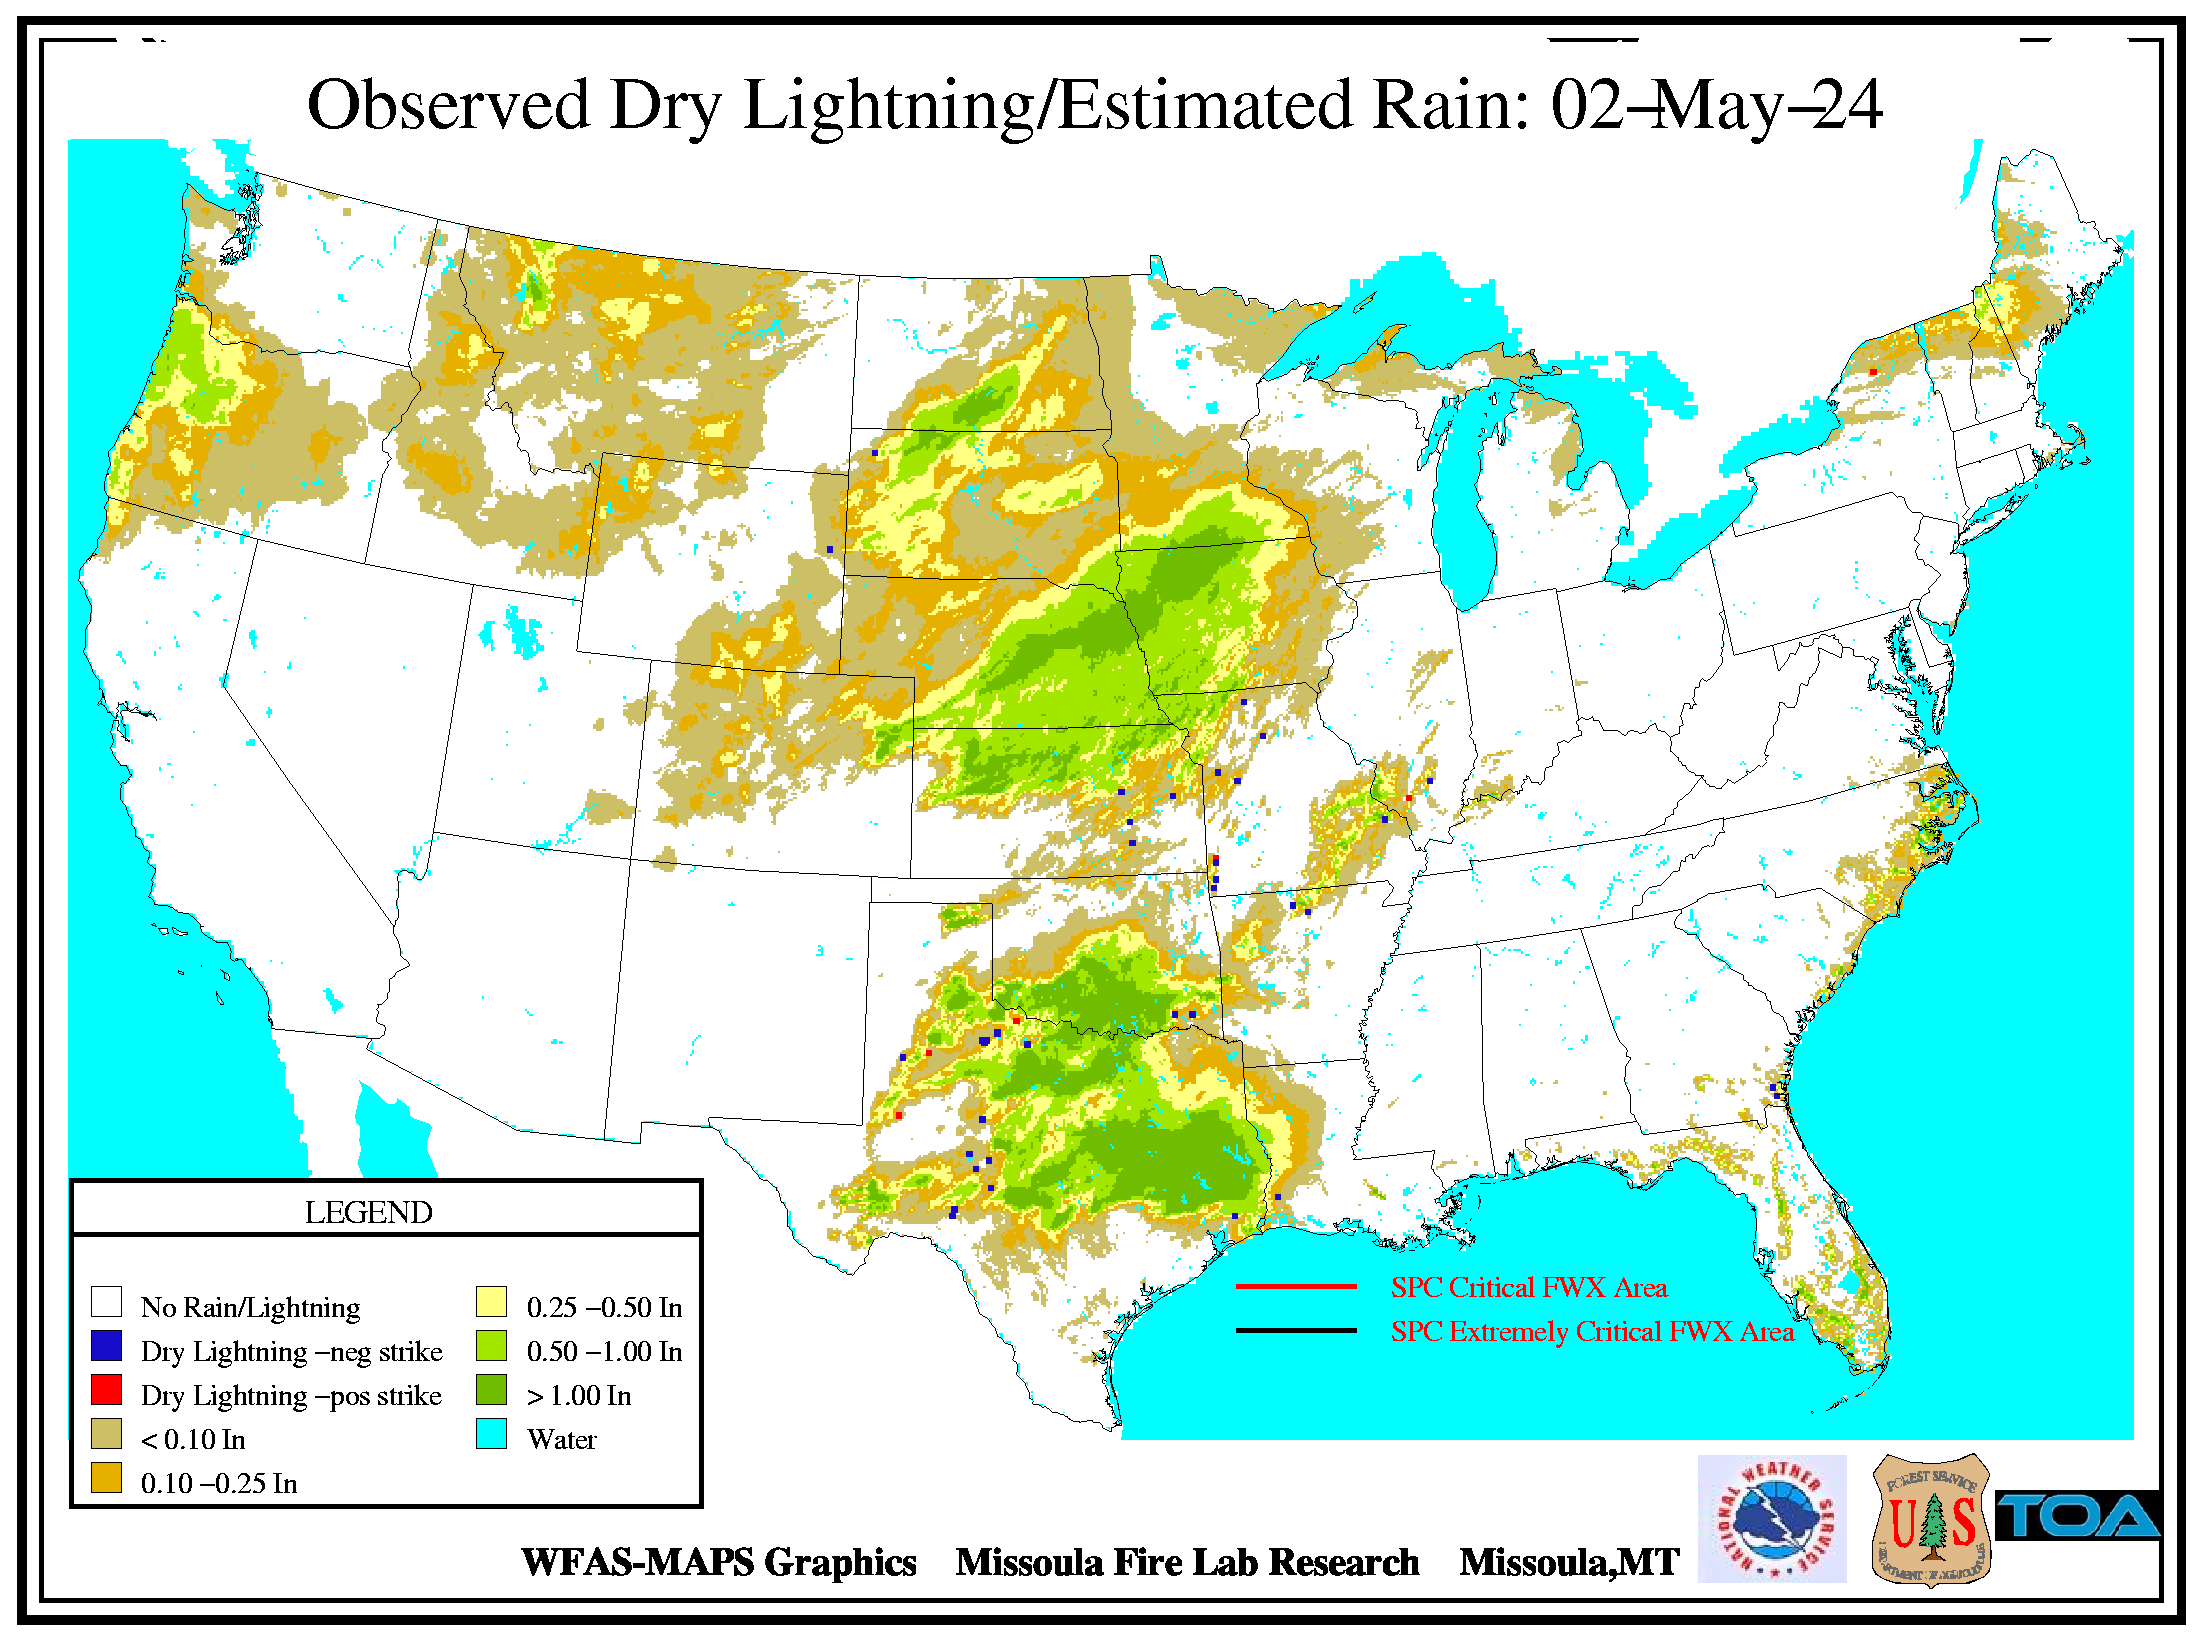 (Graphic) Map of Observed Dry Lightning/Estimated Rain